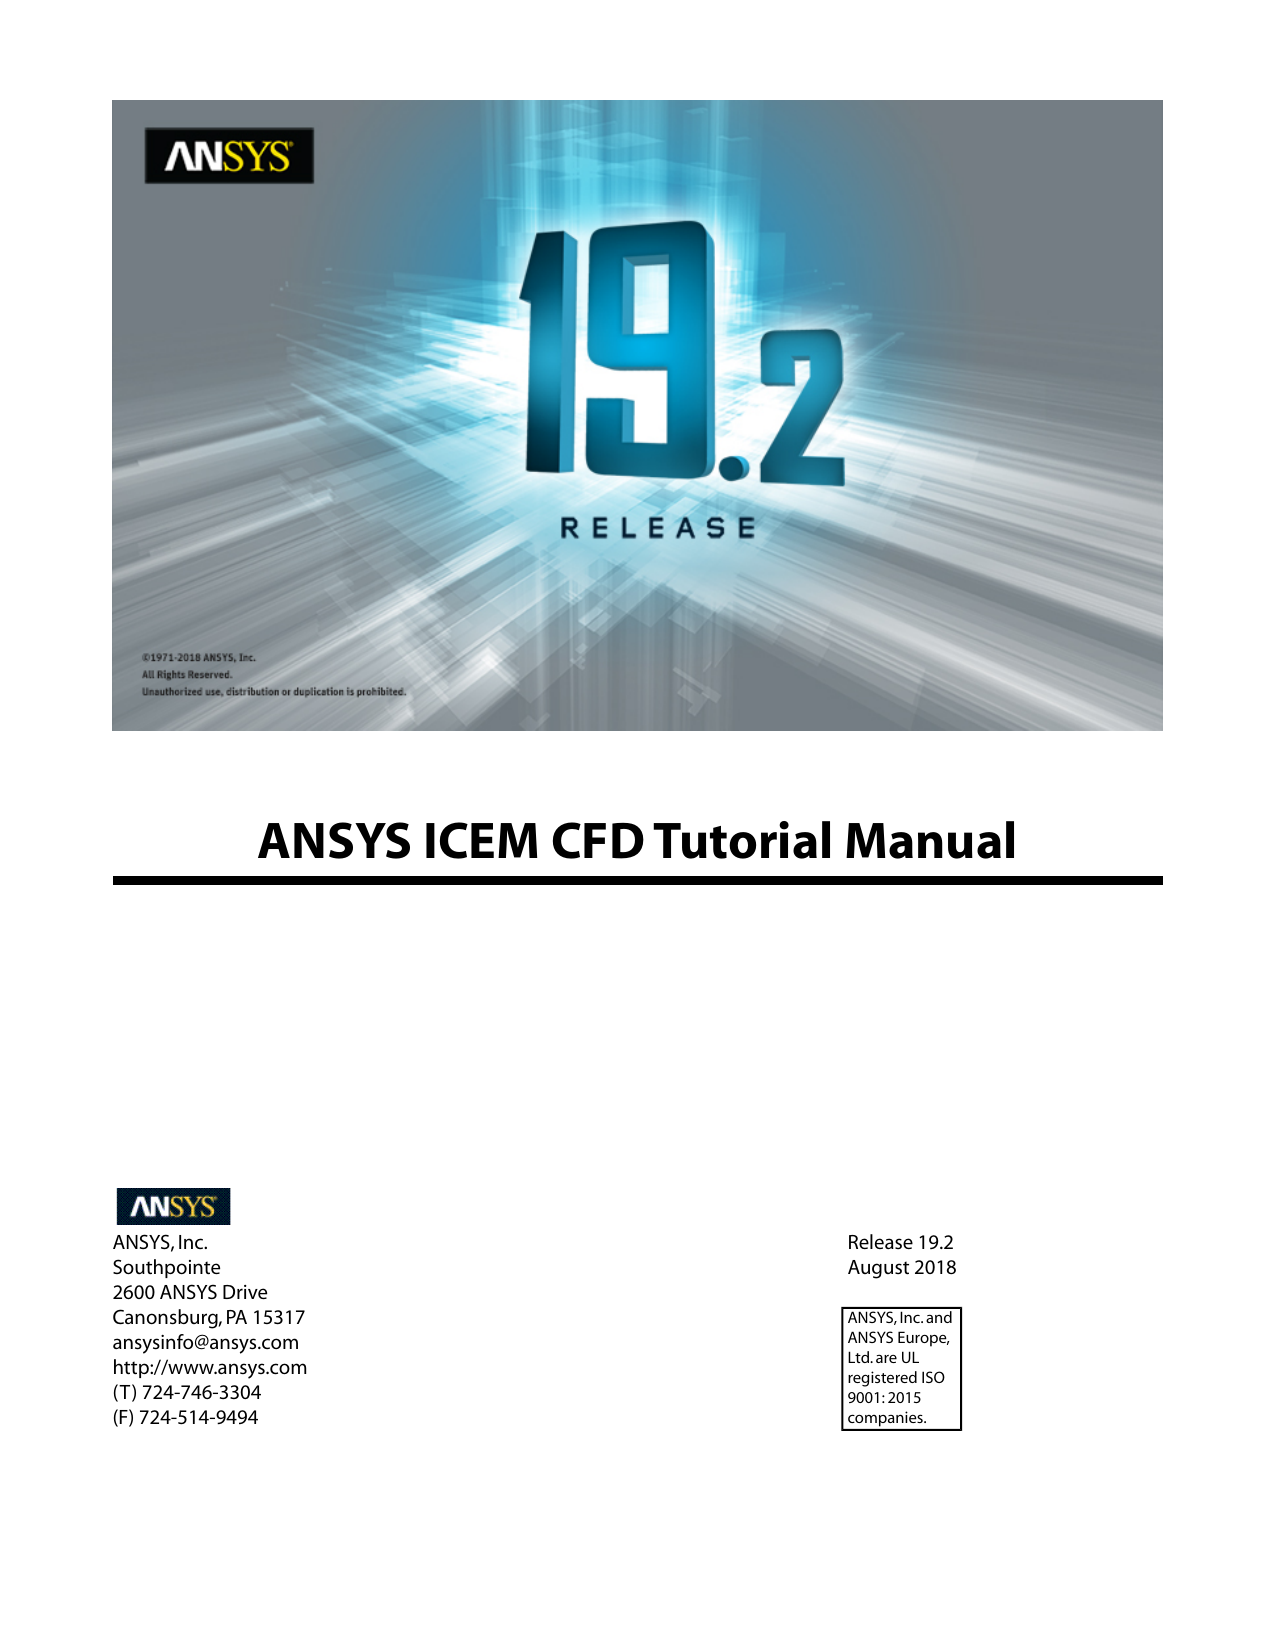 ansys icem cfd